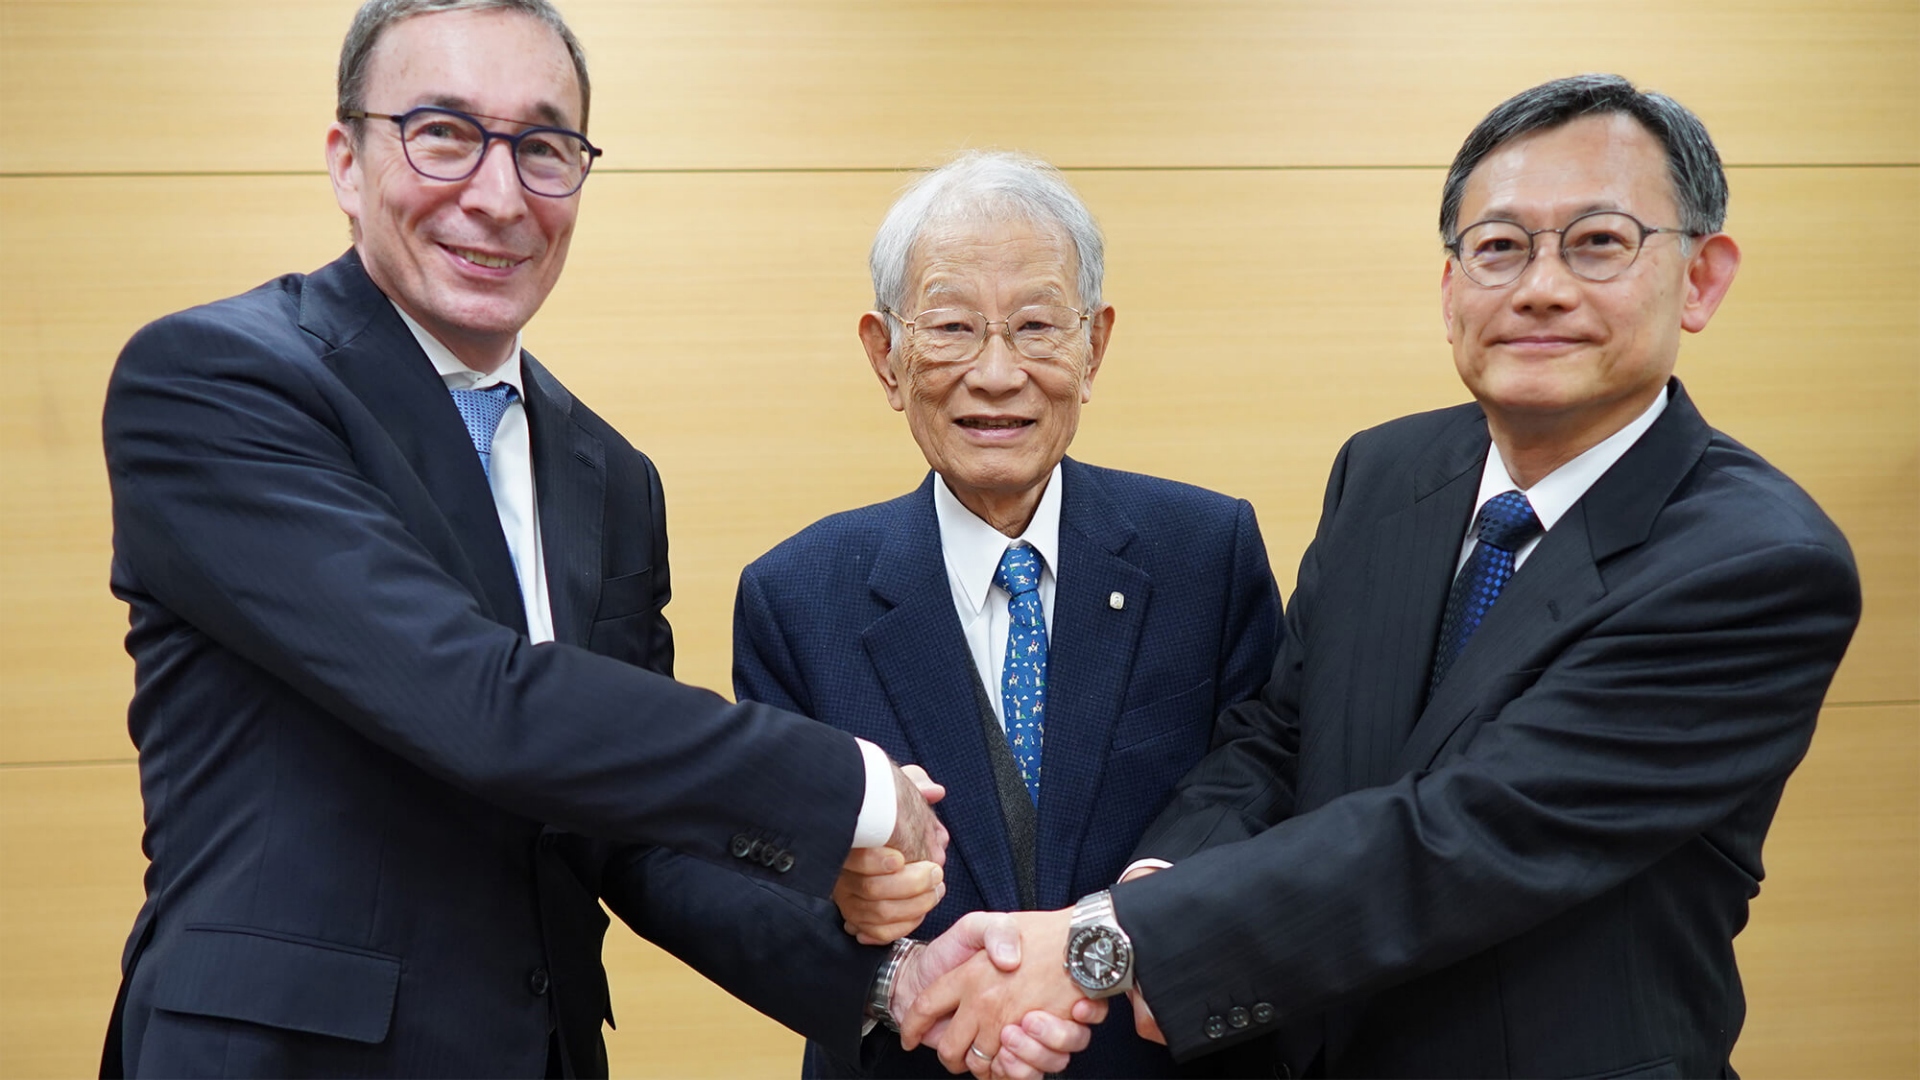 Signing of the strategic collaboration agreement: Dr. Stefan Sacré, Head of ZEISS in Japan, Prof. Dr. Hiroshi Matsumoto, President of RIKEN, and Dr. Yoshihiro Aburatani, President RIKEN Innovation (from left).